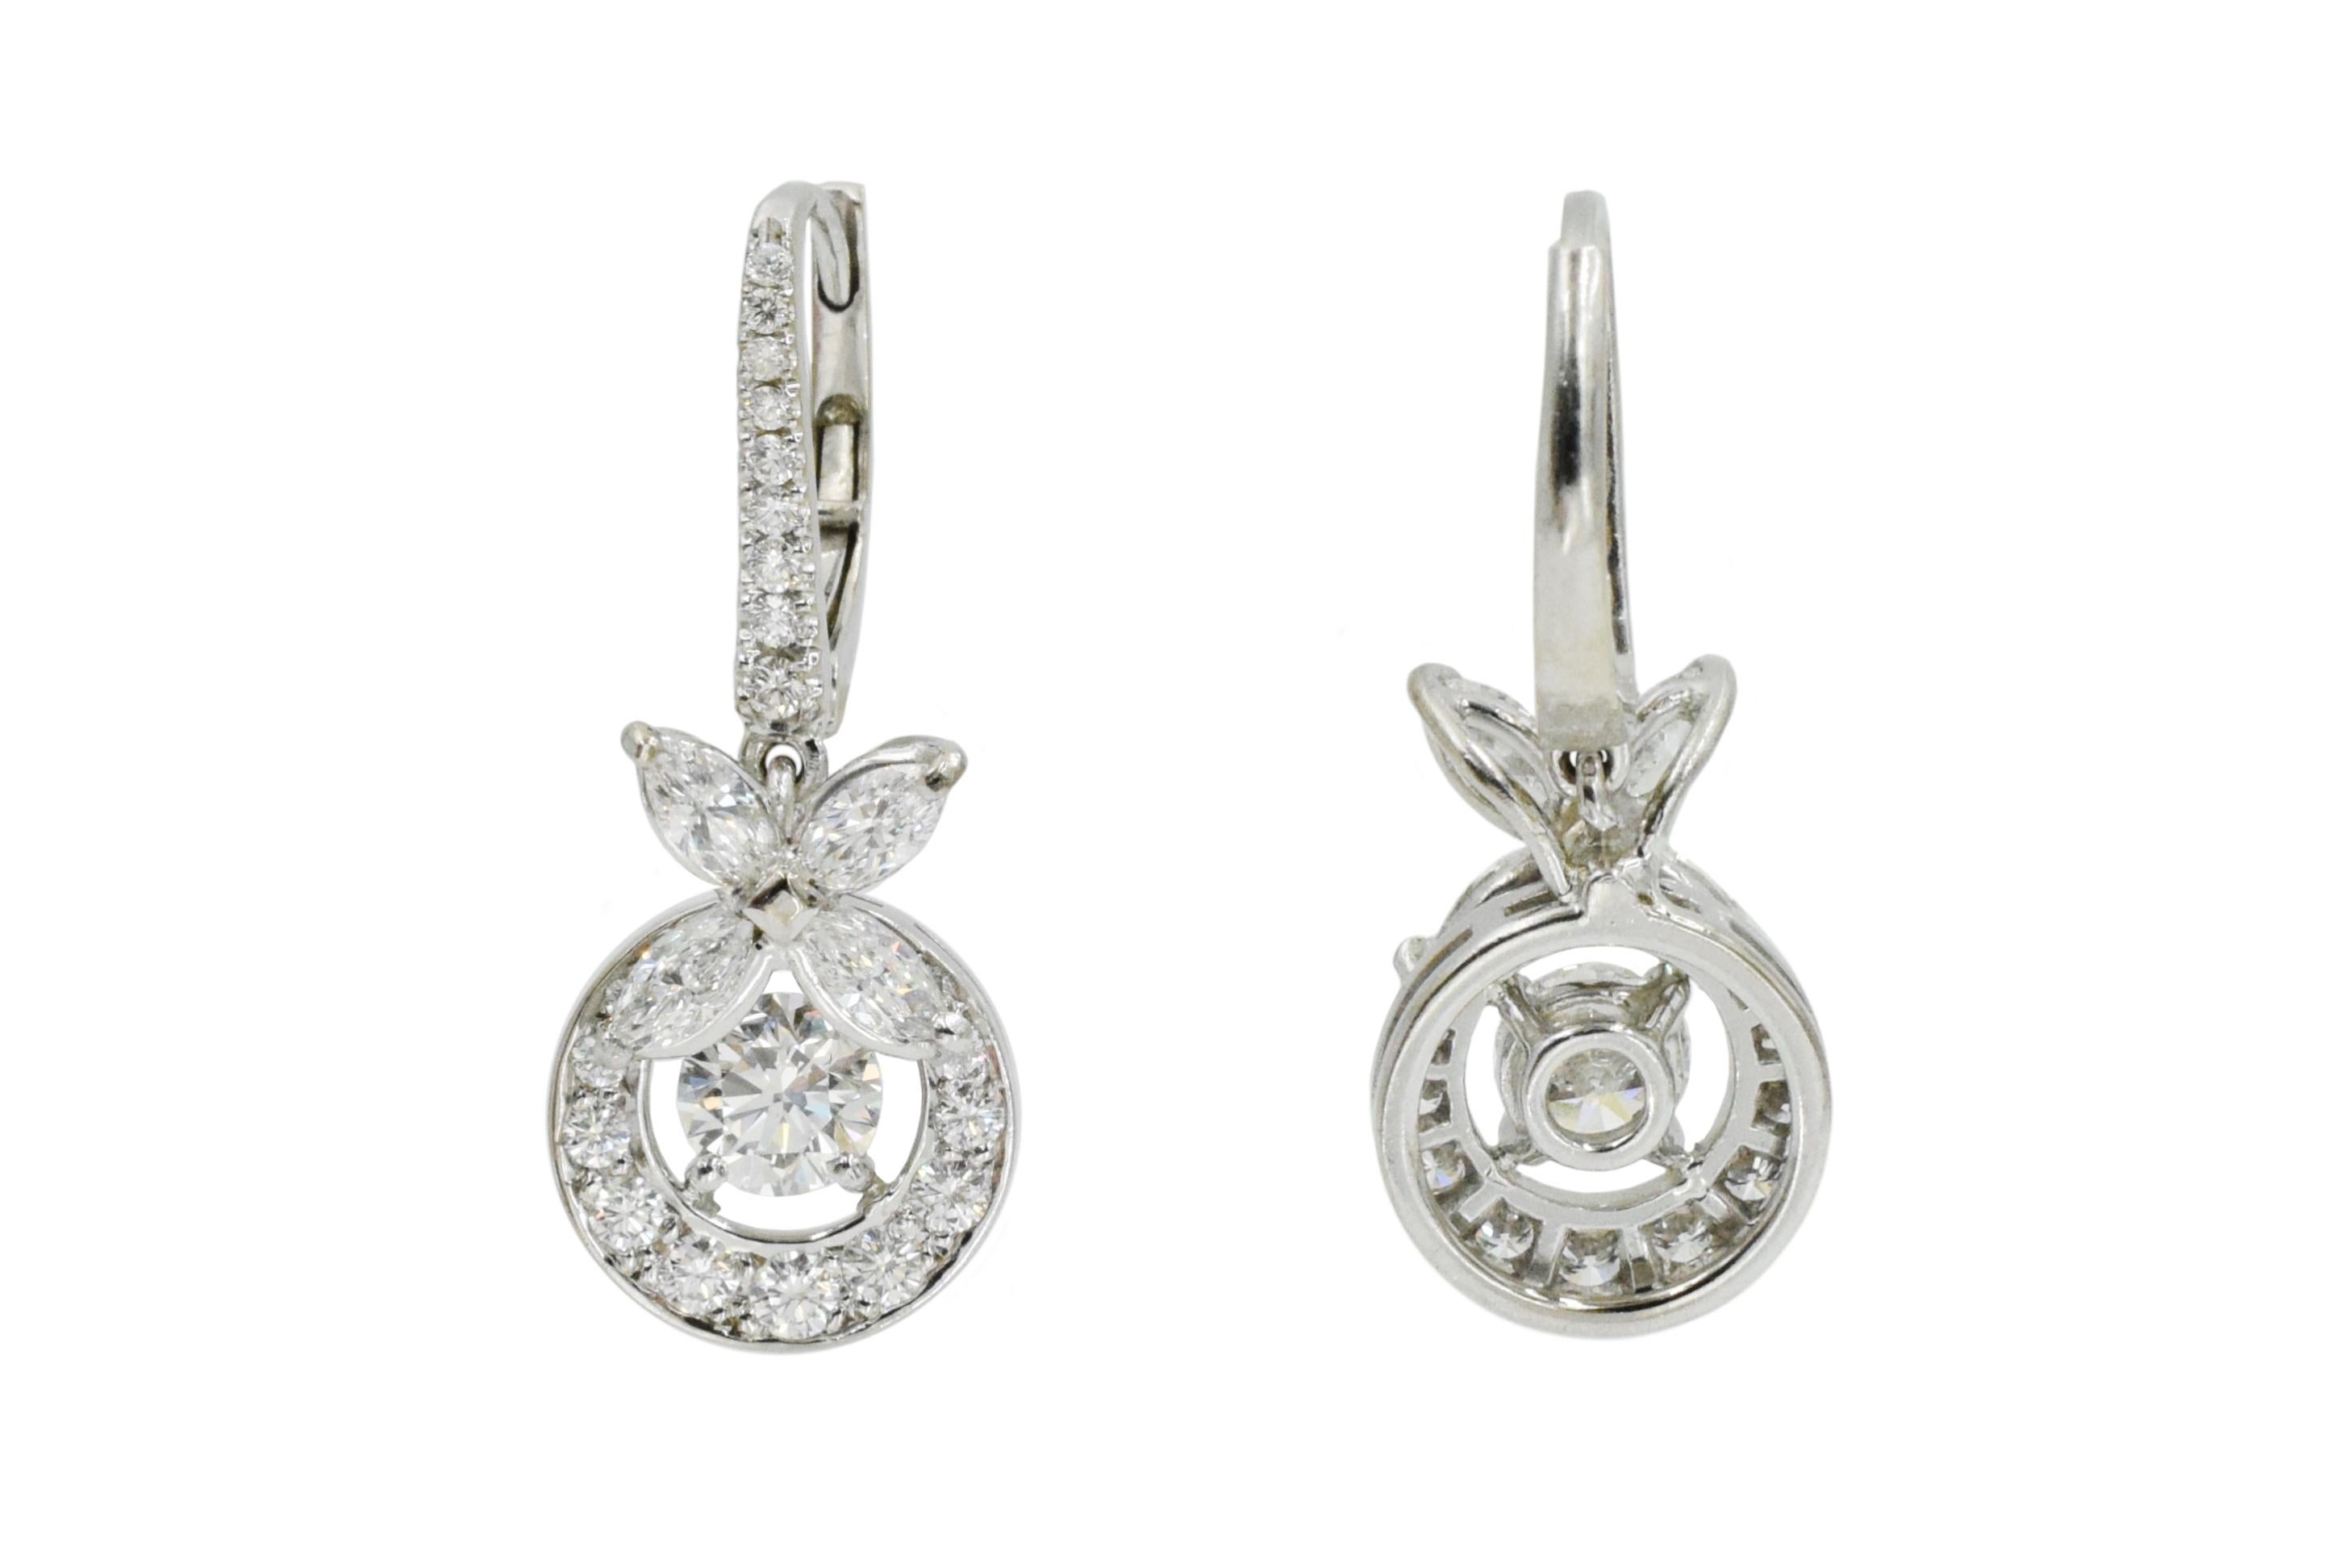 Graff diamond butterfly earrings. This pair of earrings has two center round diamonds weighing approximately total of 1.00carat, 46 fine quality round diamonds  weighing 0.73 carats and 4 marquise fine quality diamonds weighing 0.90 carats  
Total